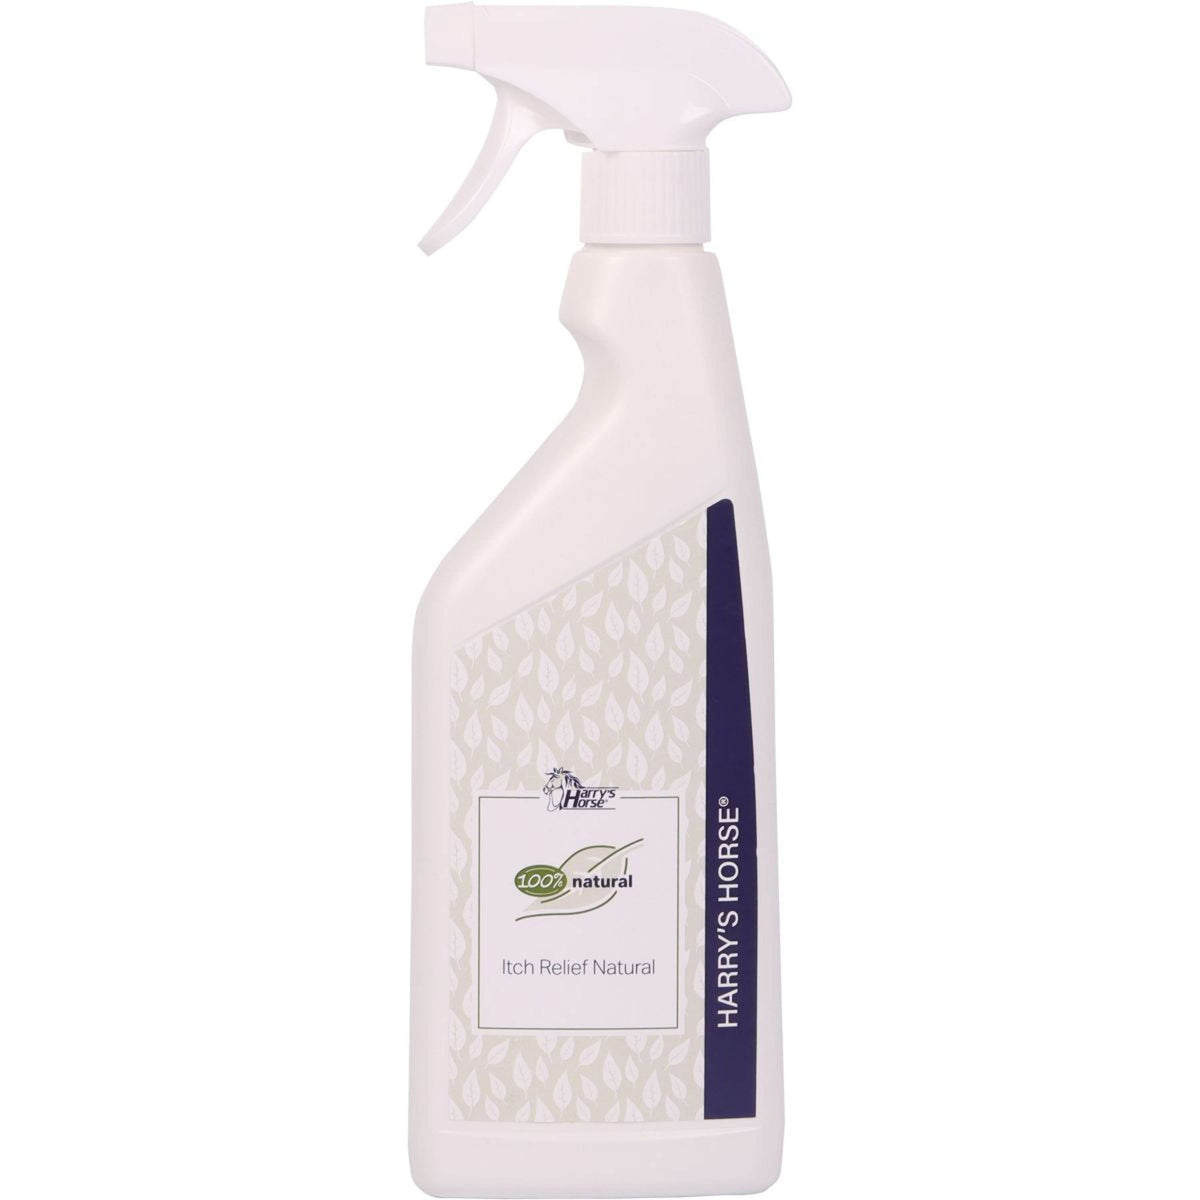 Harry's Horse Itch Relief Natural